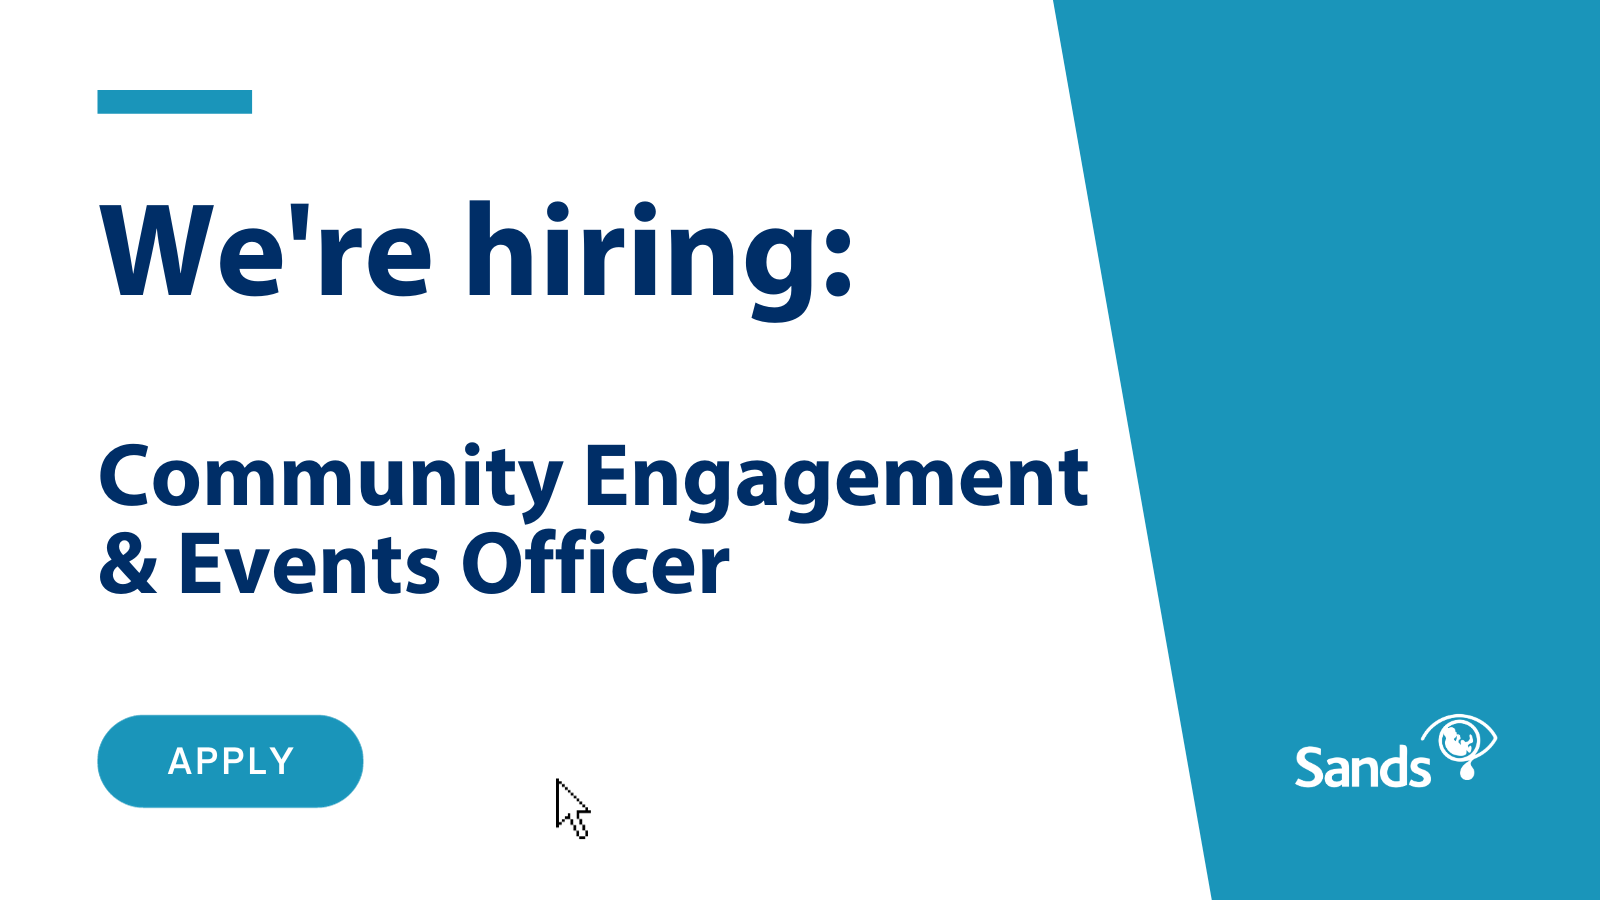 We are hiring Community Engagement and Events Officer